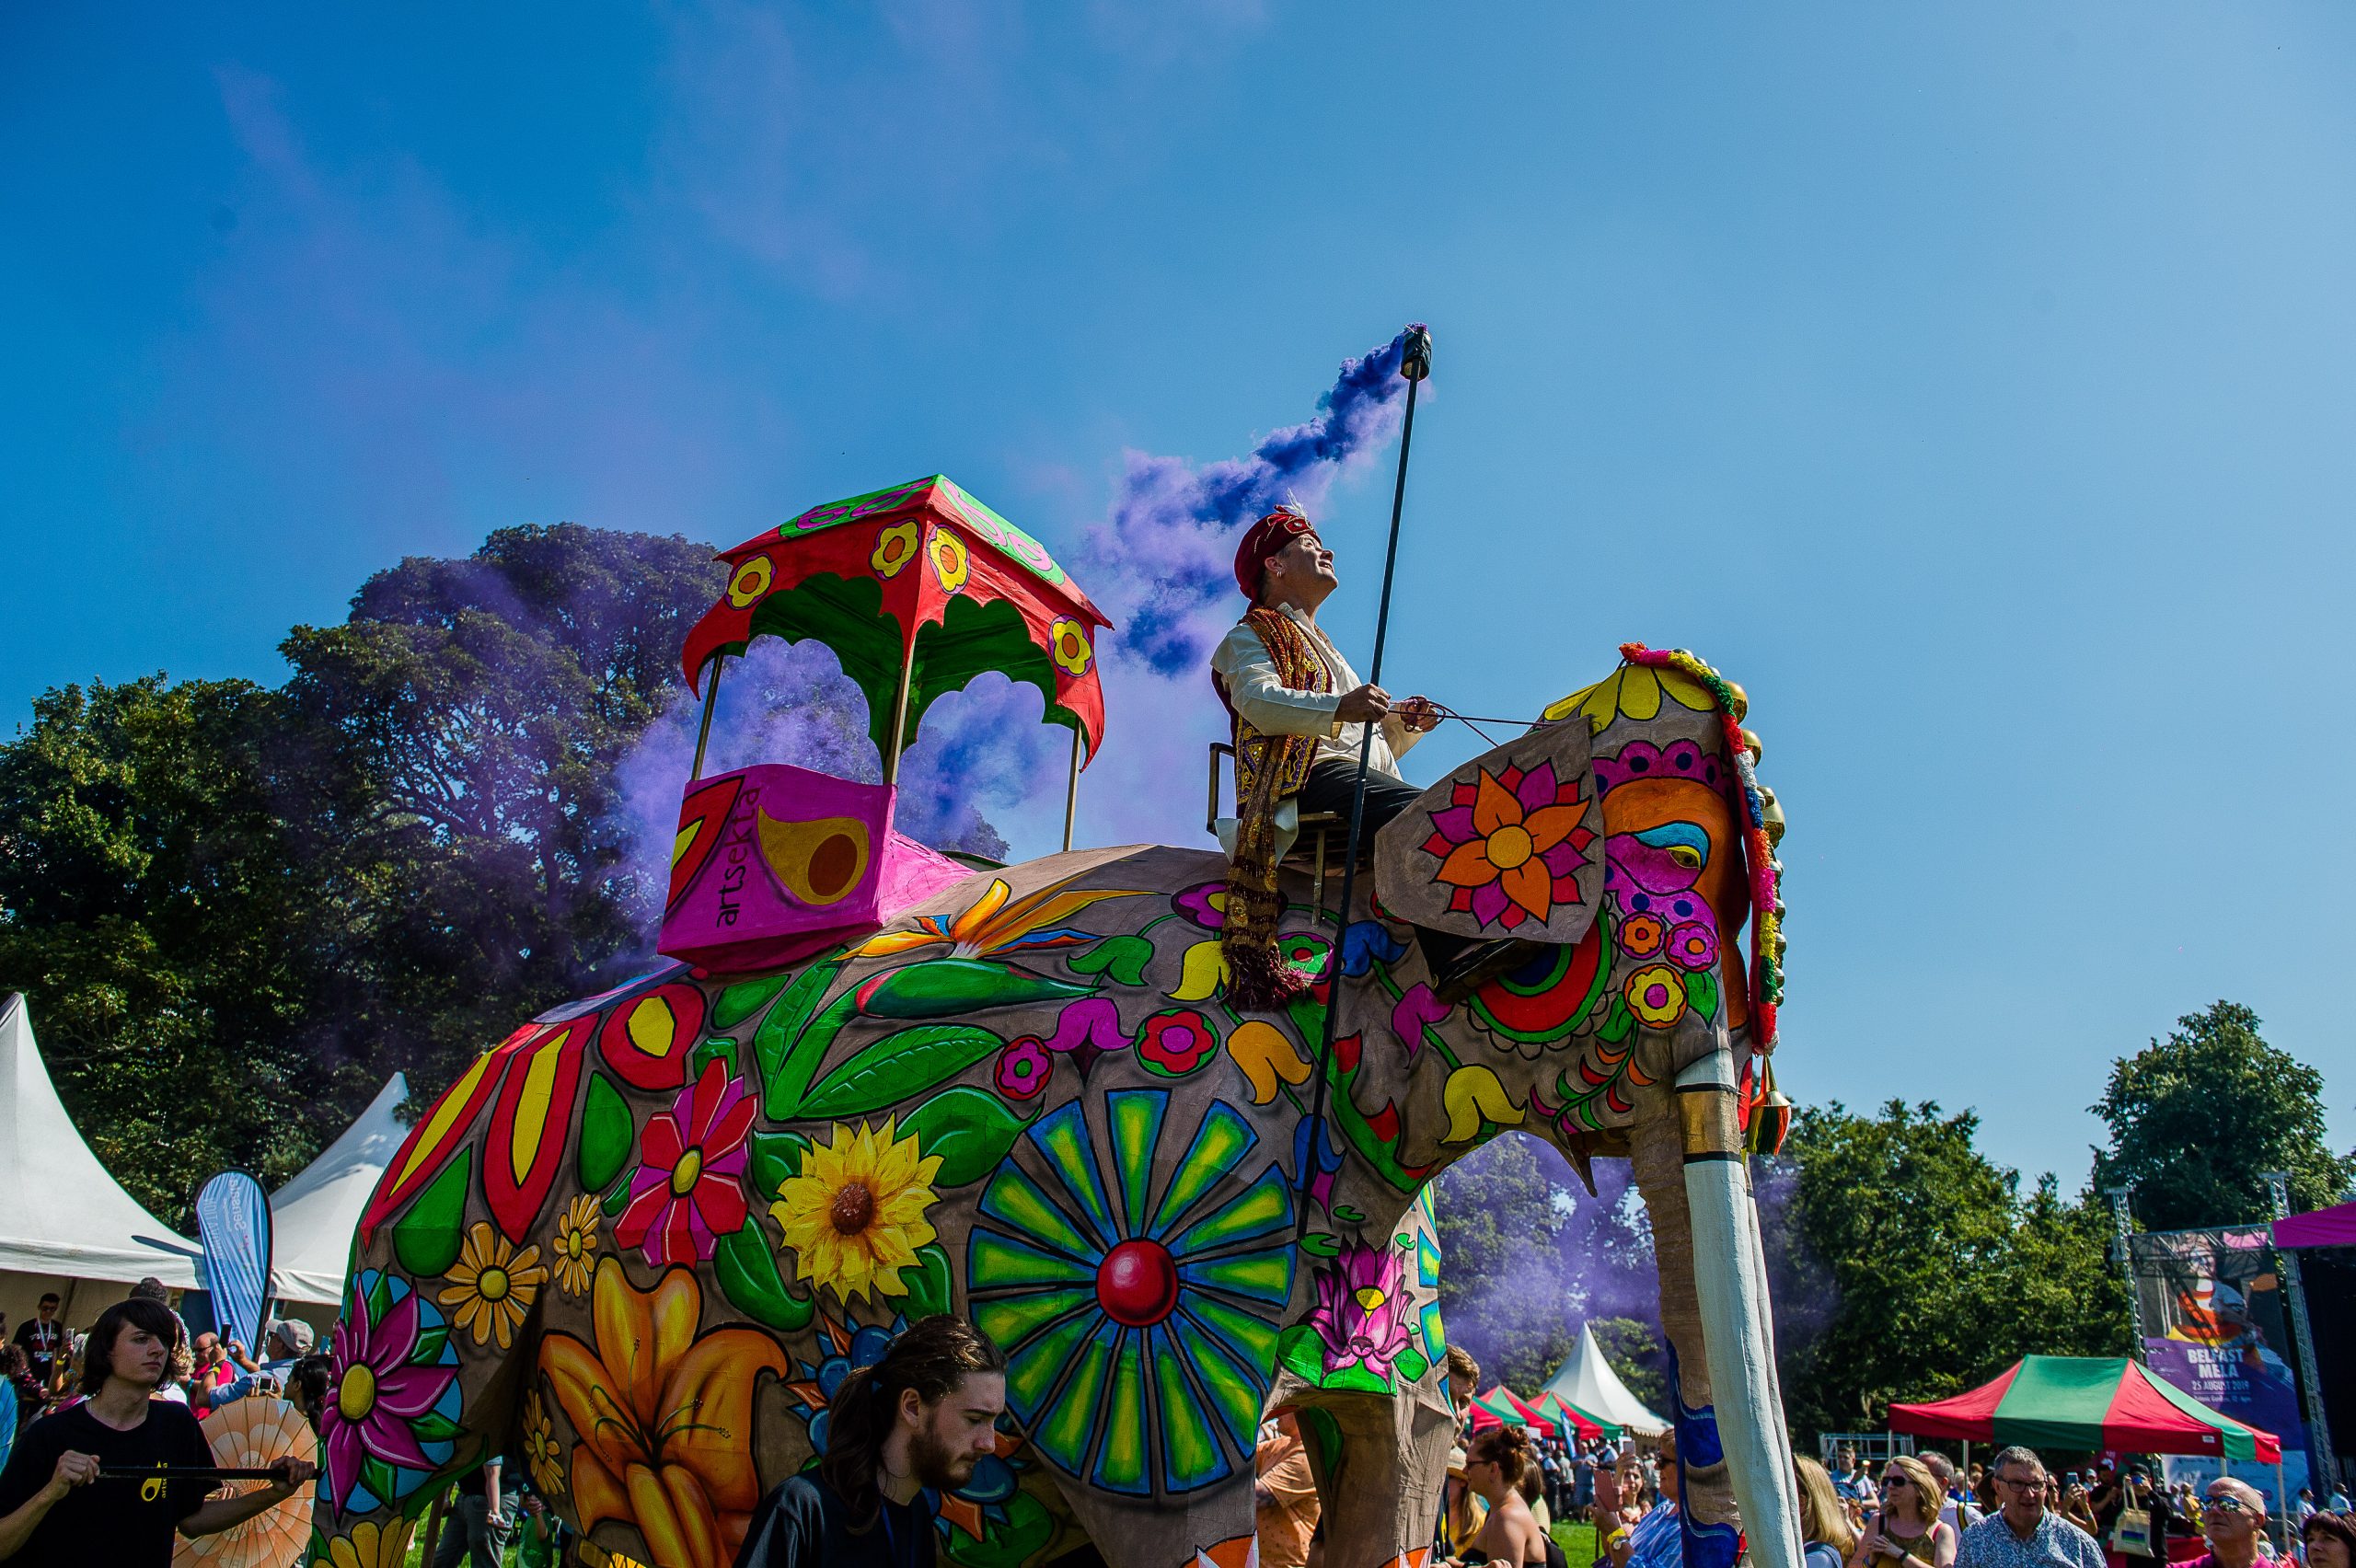 A photo from the Mela festival parade in 2019.